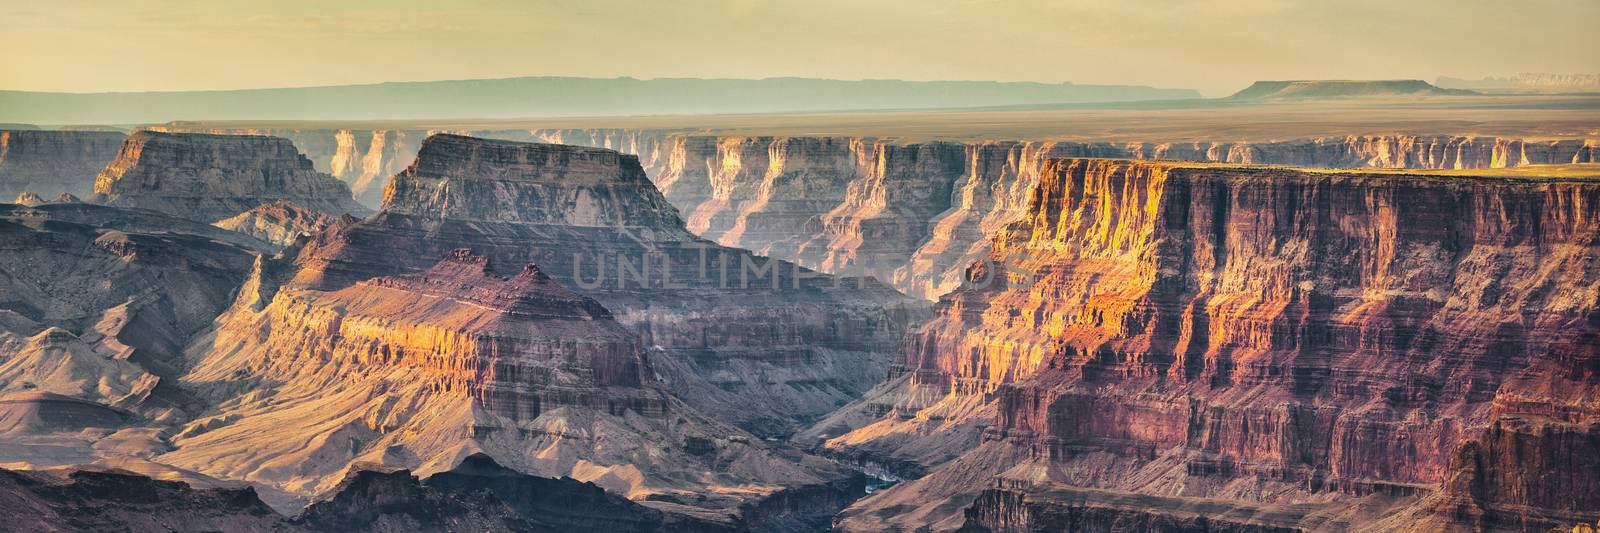 Grand Canyon banner nature landscape steep cliffs at sunset dusk panoramic background by Maridav